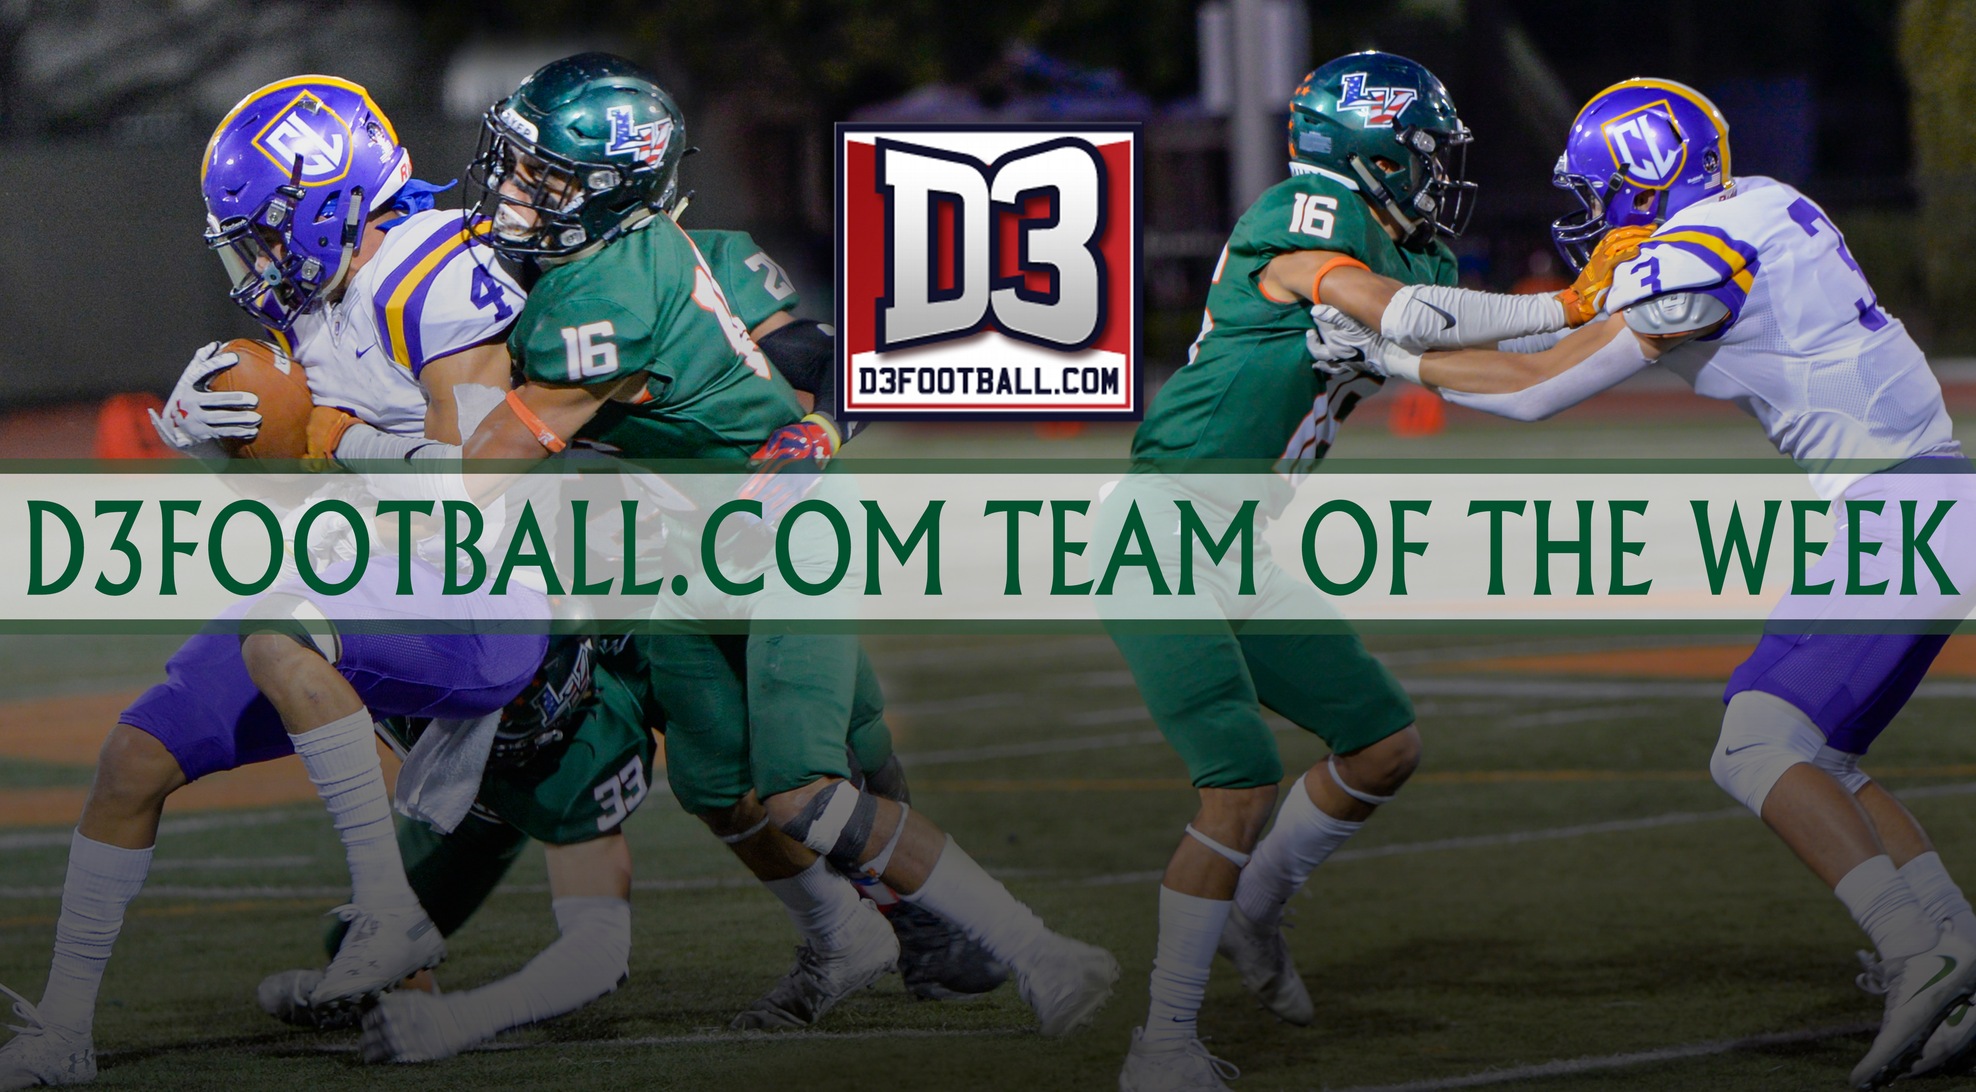 Moronez Named to D3football.com Team of the Week